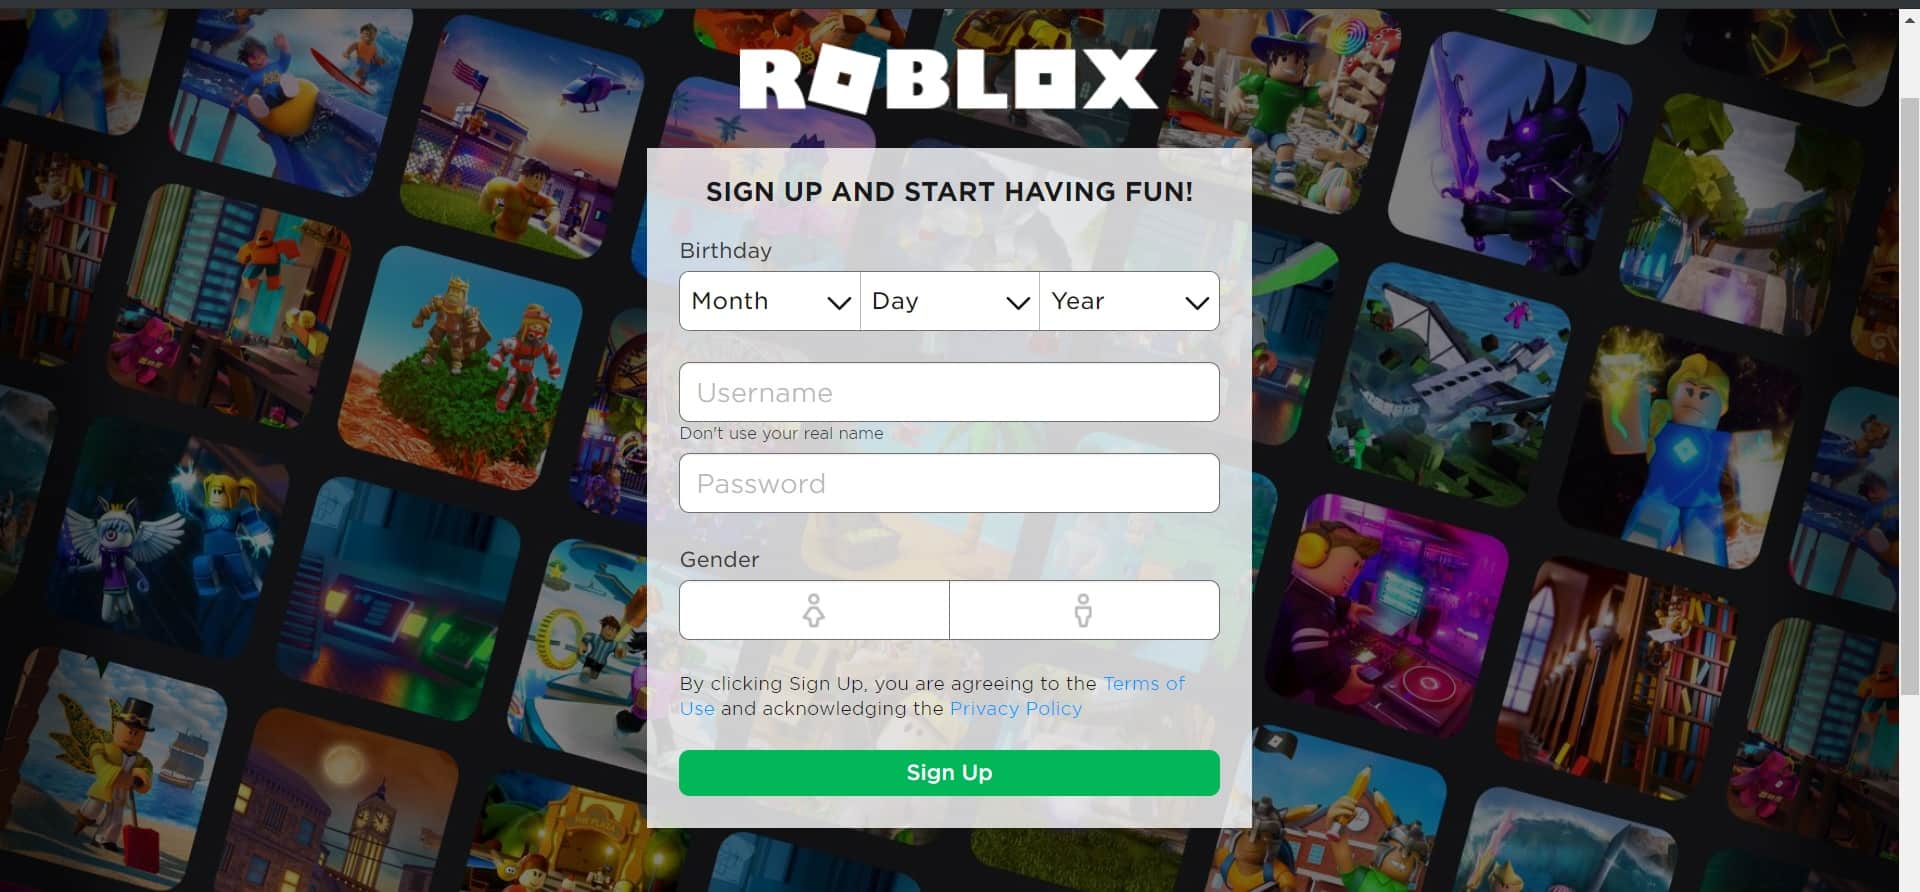 the best roblox games to play in 2019